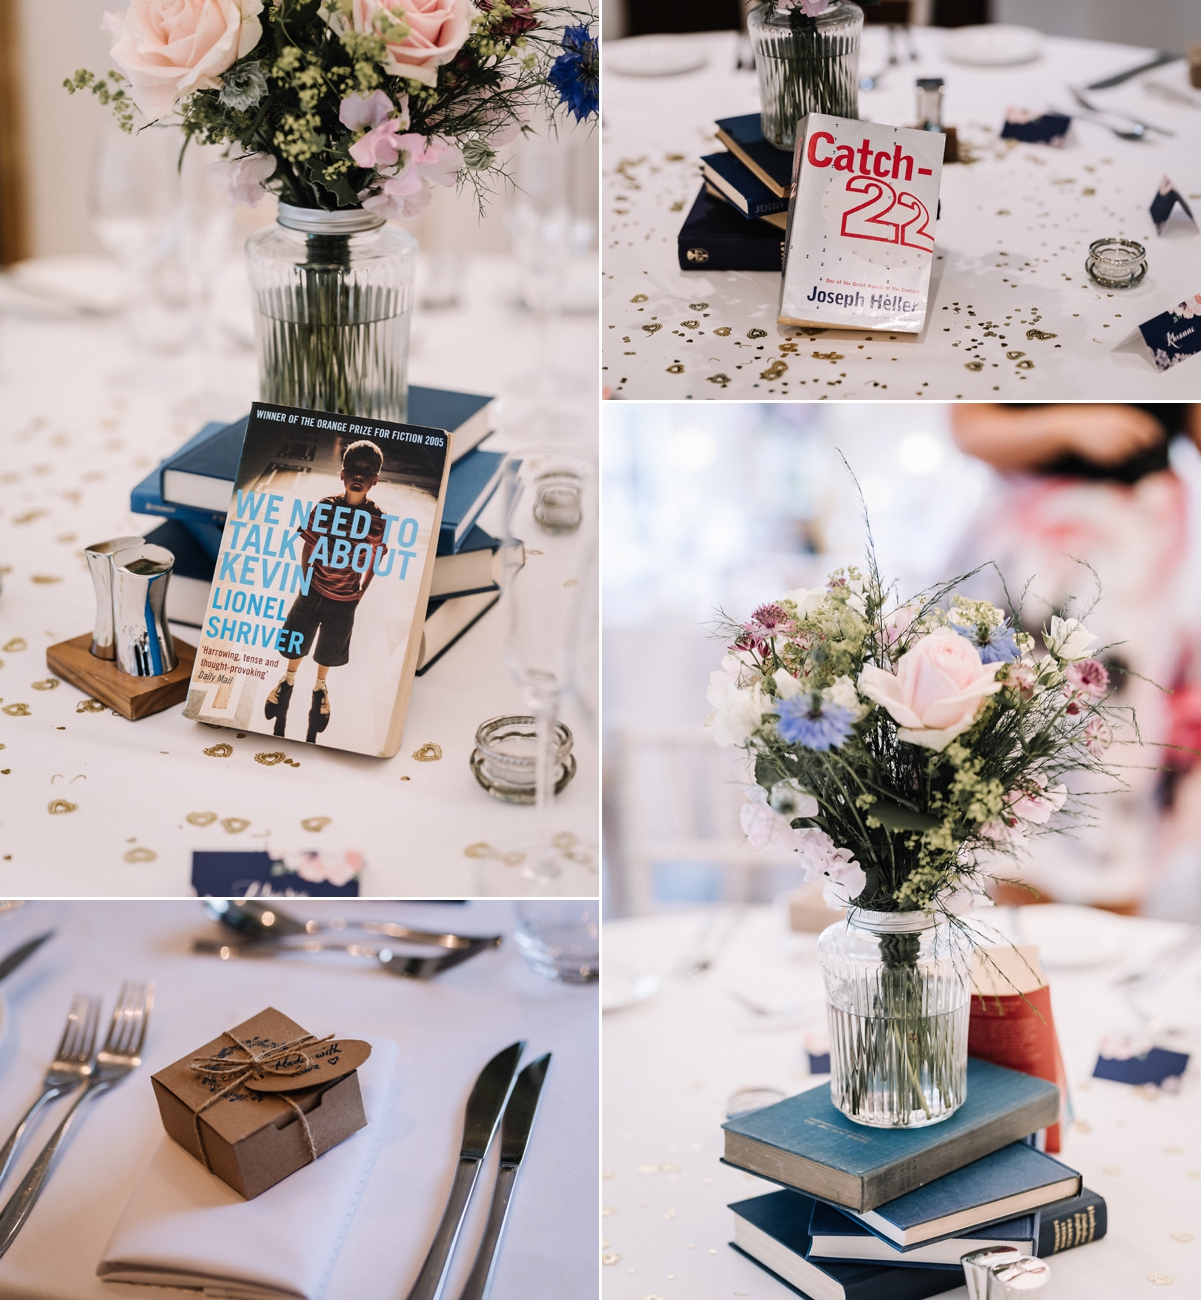 22 A countryside wedding in the Cotswolds